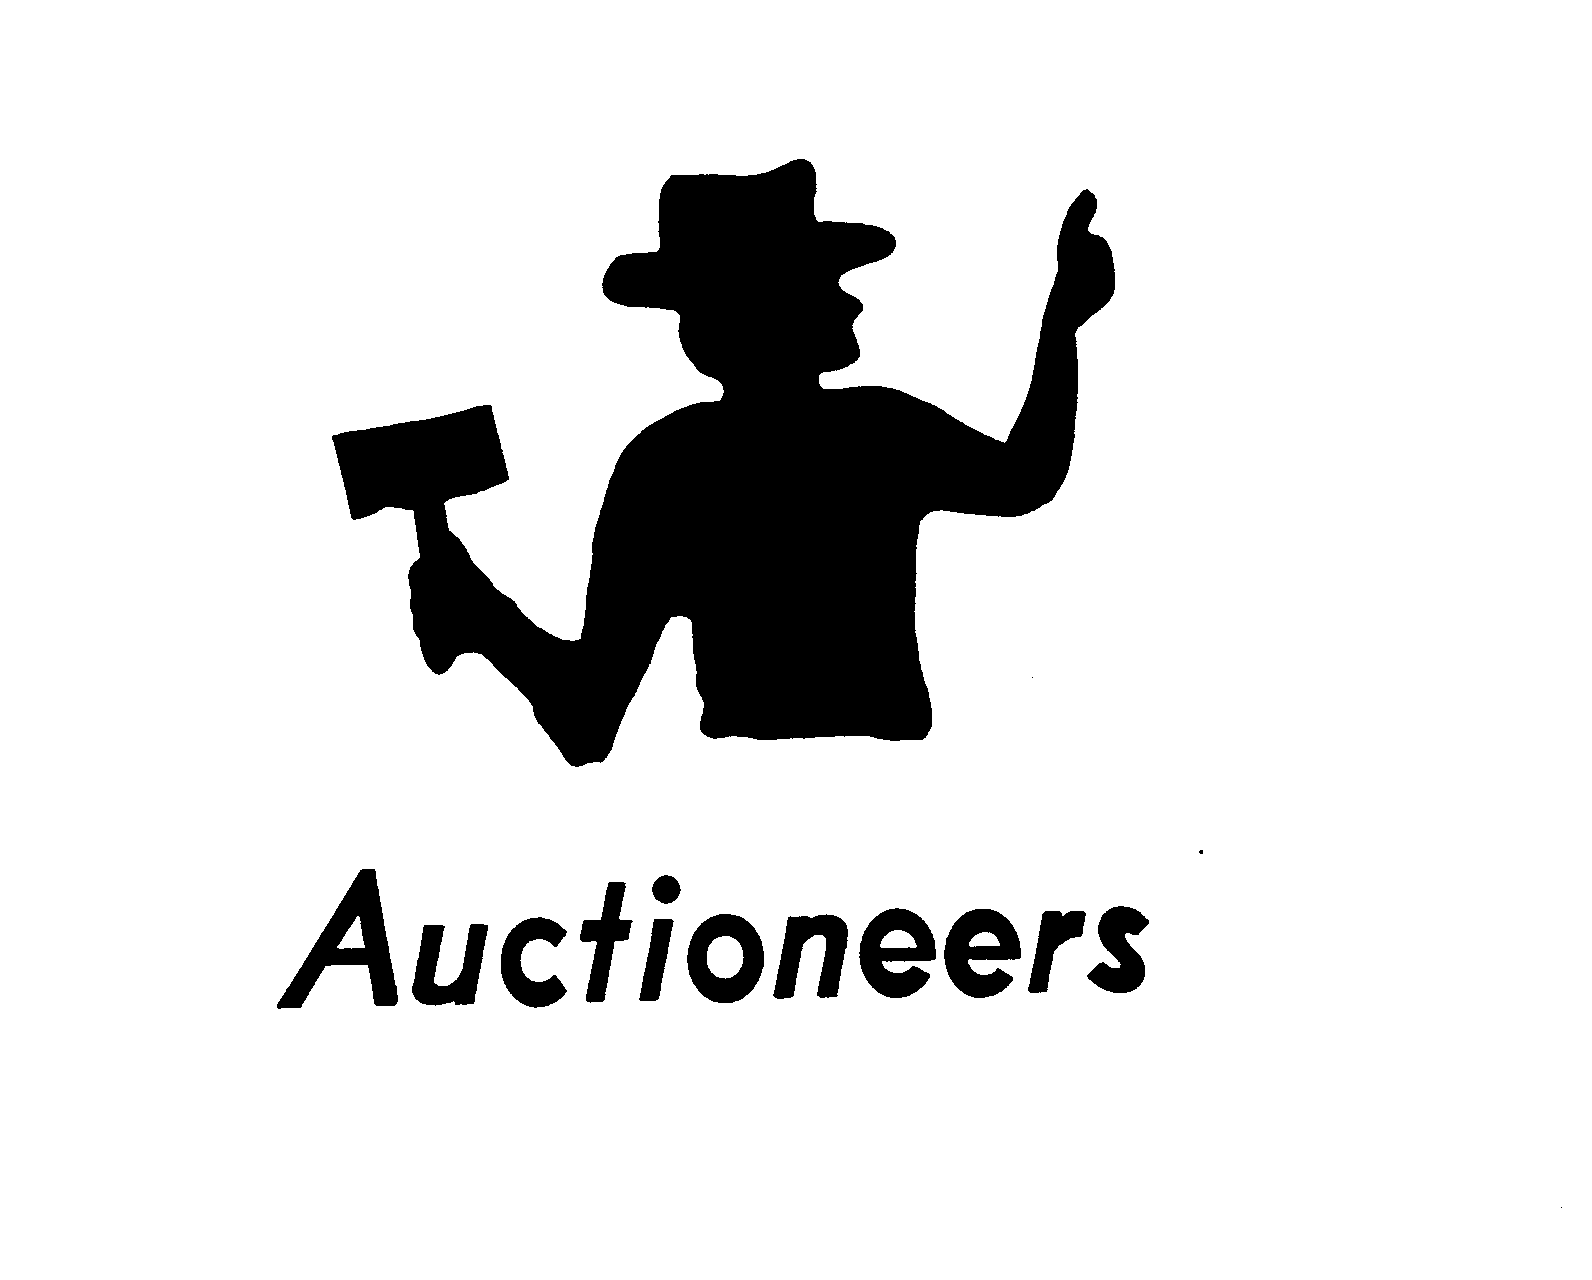 AUCTIONEERS